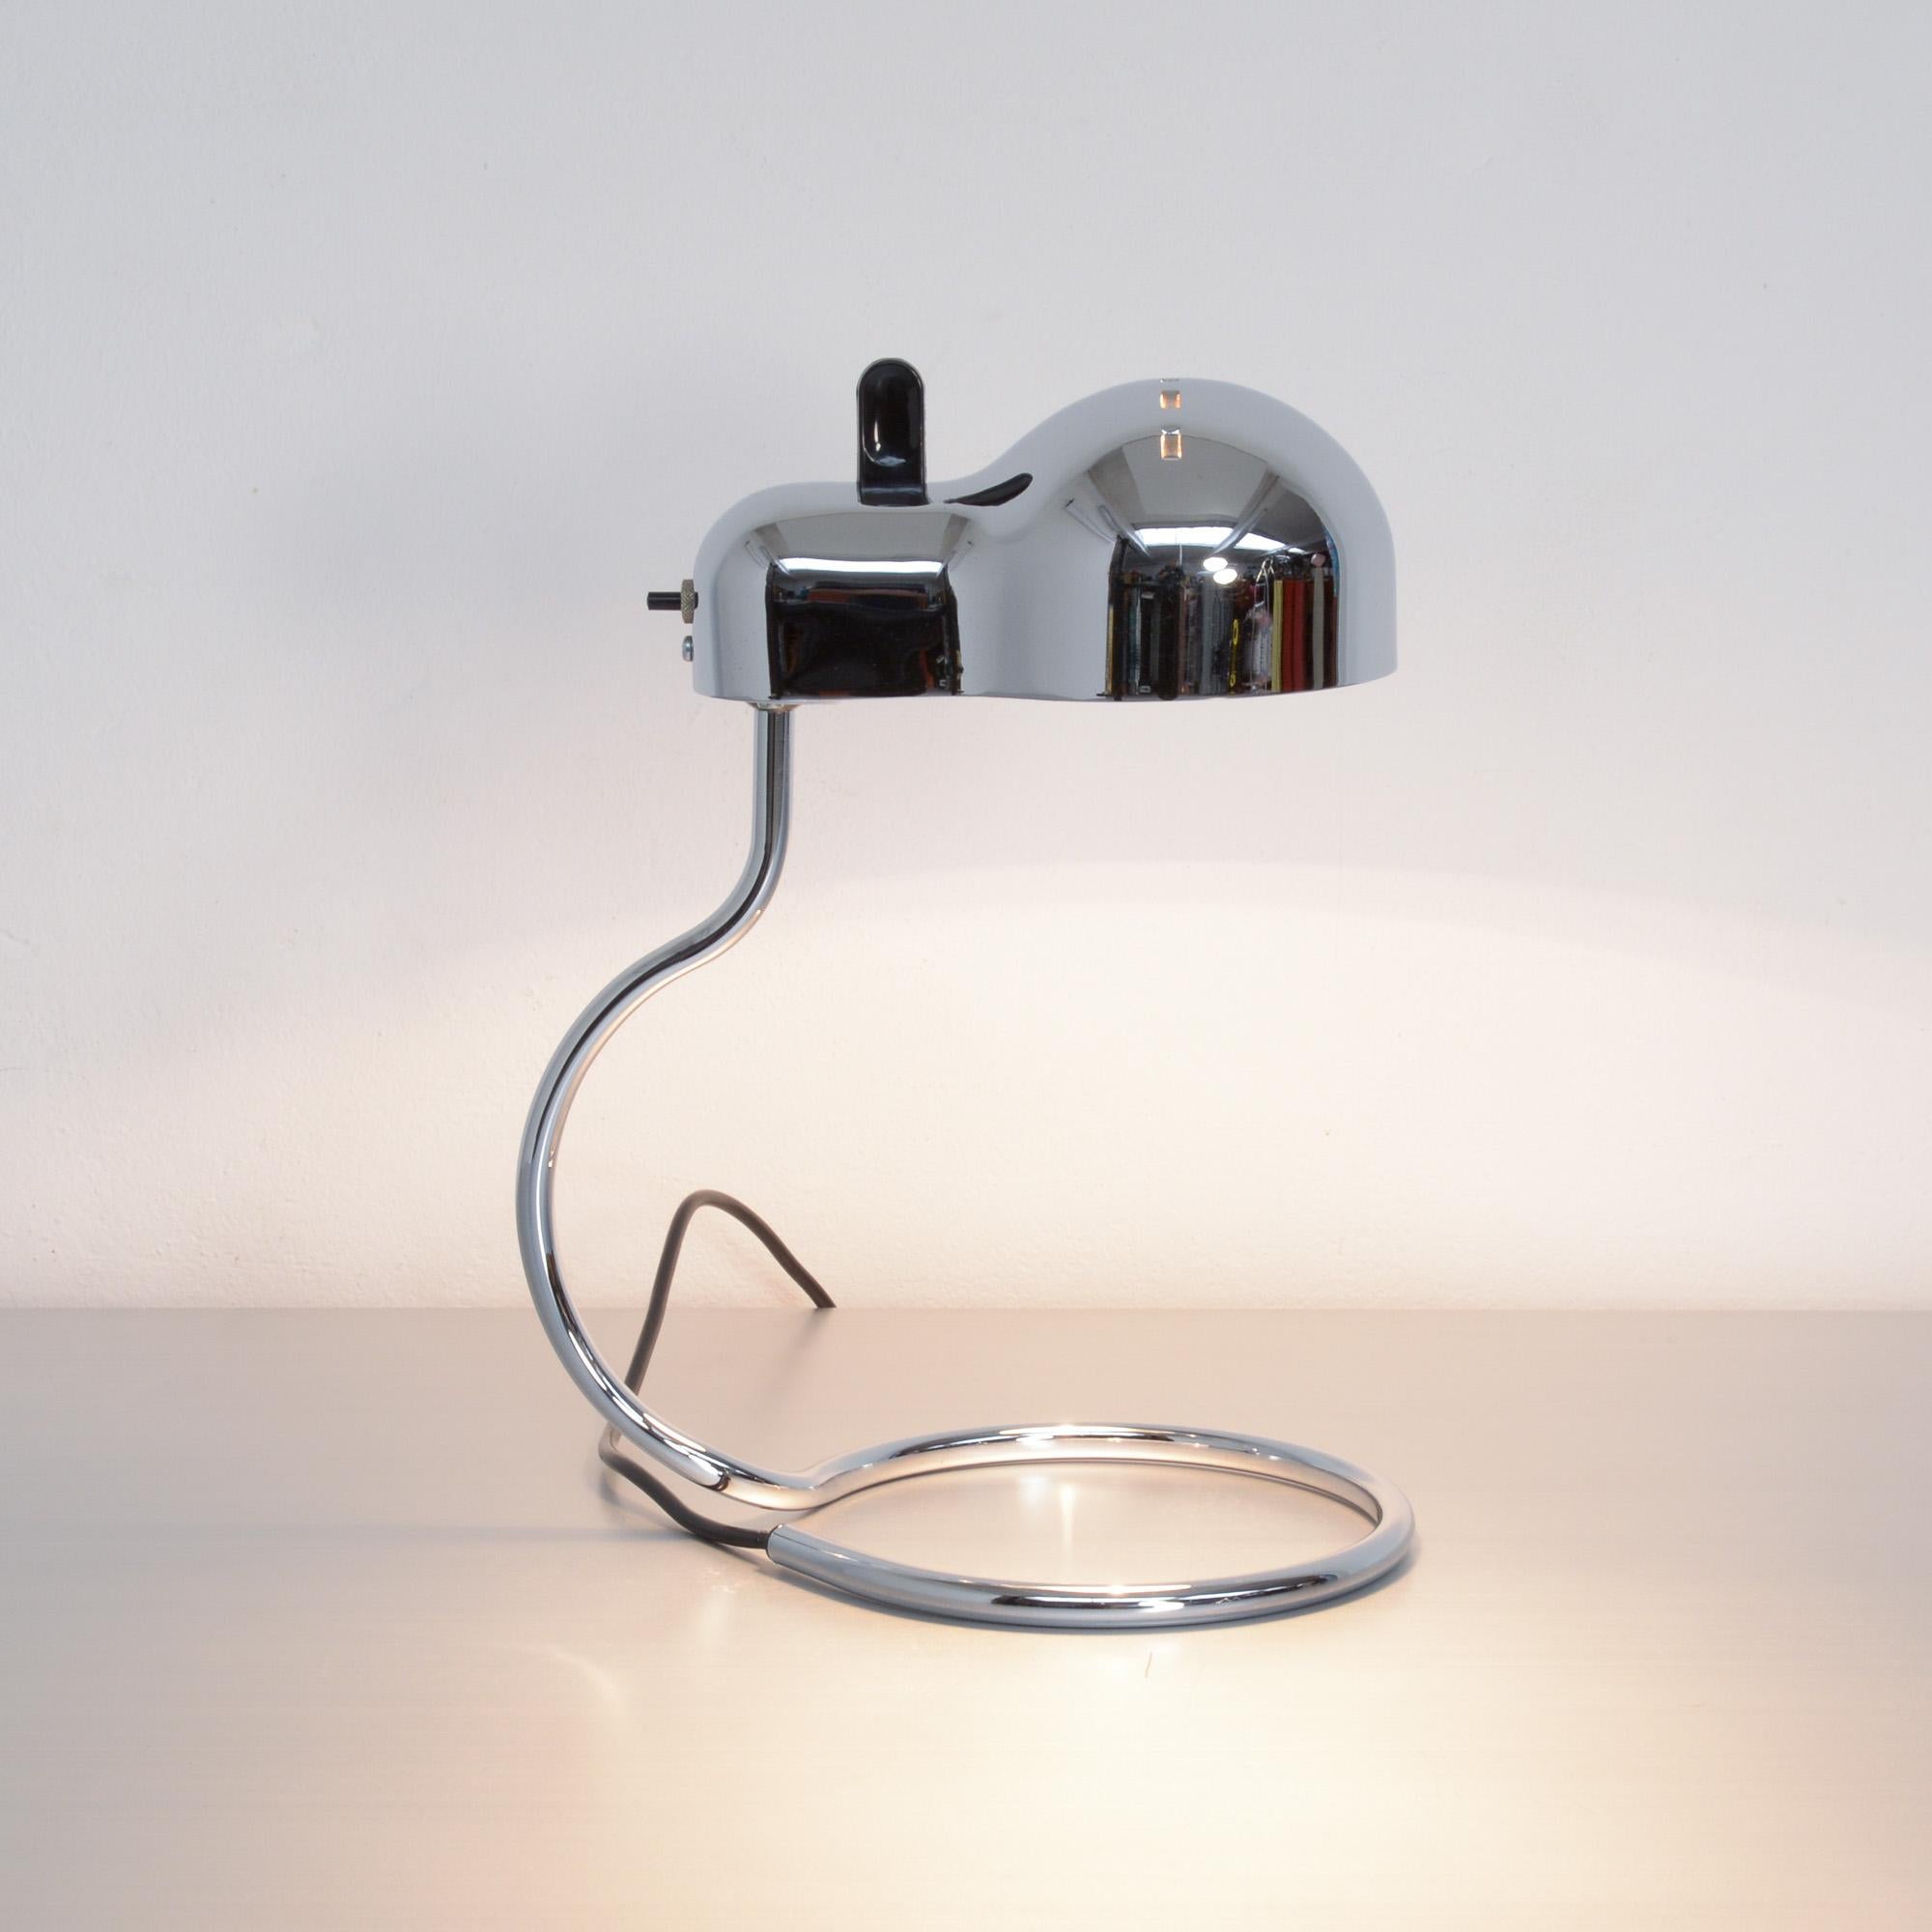 The Minitopo desk lamp was designed by Joe Colombo for Stilnovo, Italy in 1970.
This Topo in chromed metal is in very good vintage condition. The shade is turnable with the ball joint.
This old edition in chrome is hard to find, especially in this